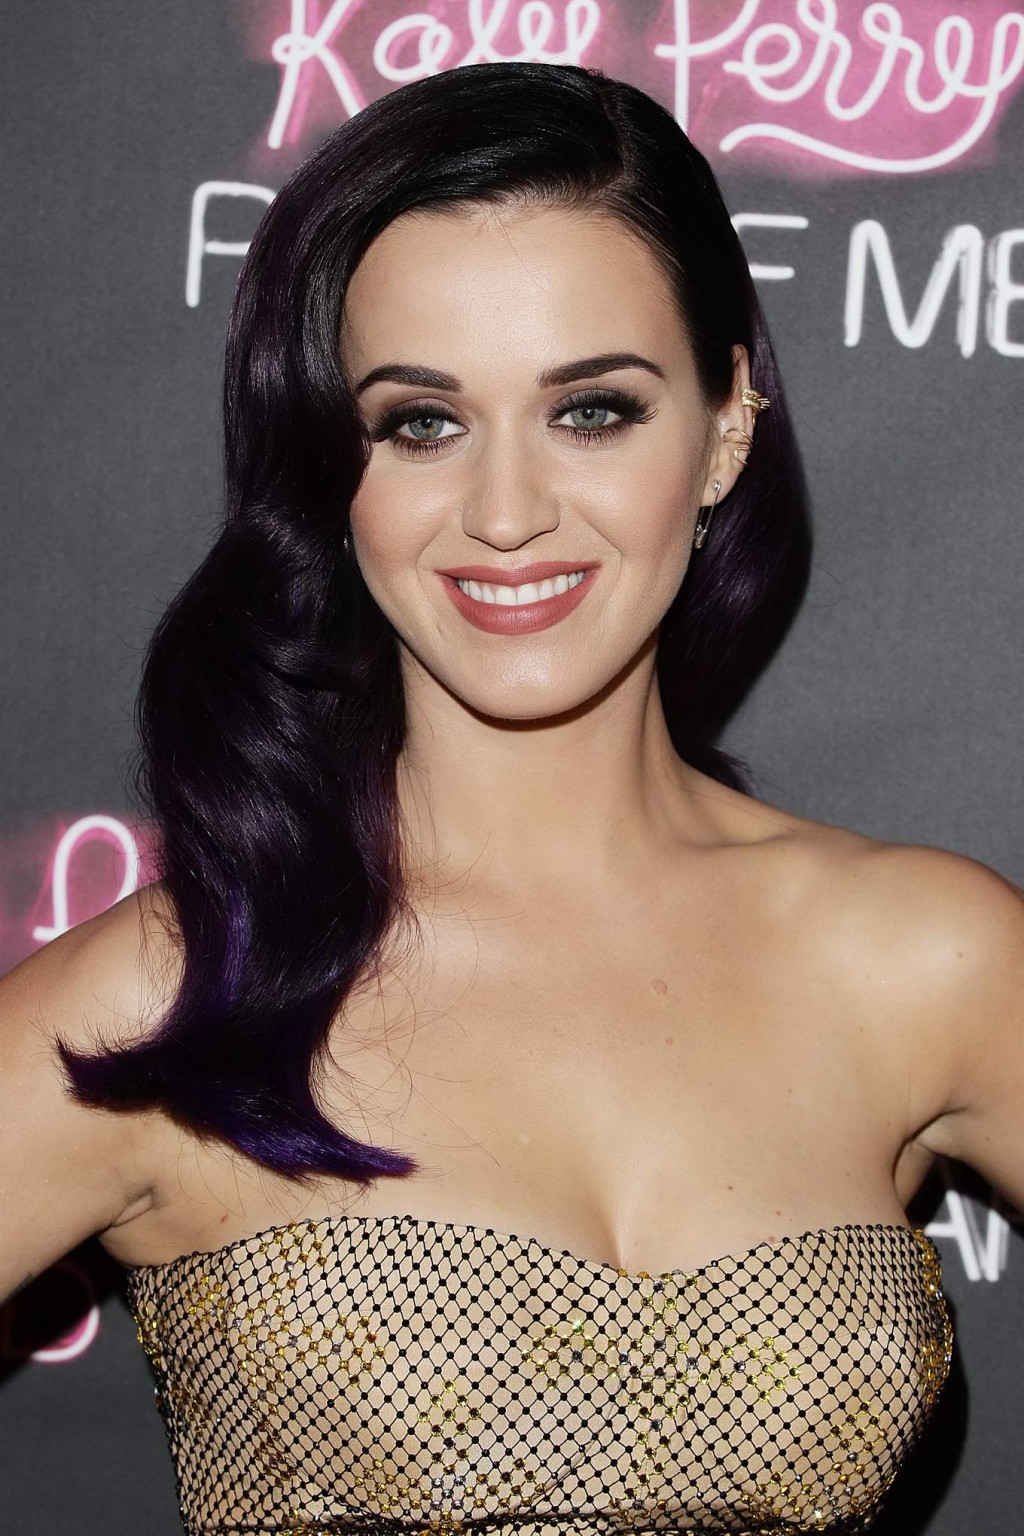 Katy Perry showing cleavage at 'Katy Perry: Part of Me' premiere in Sydney #75258551